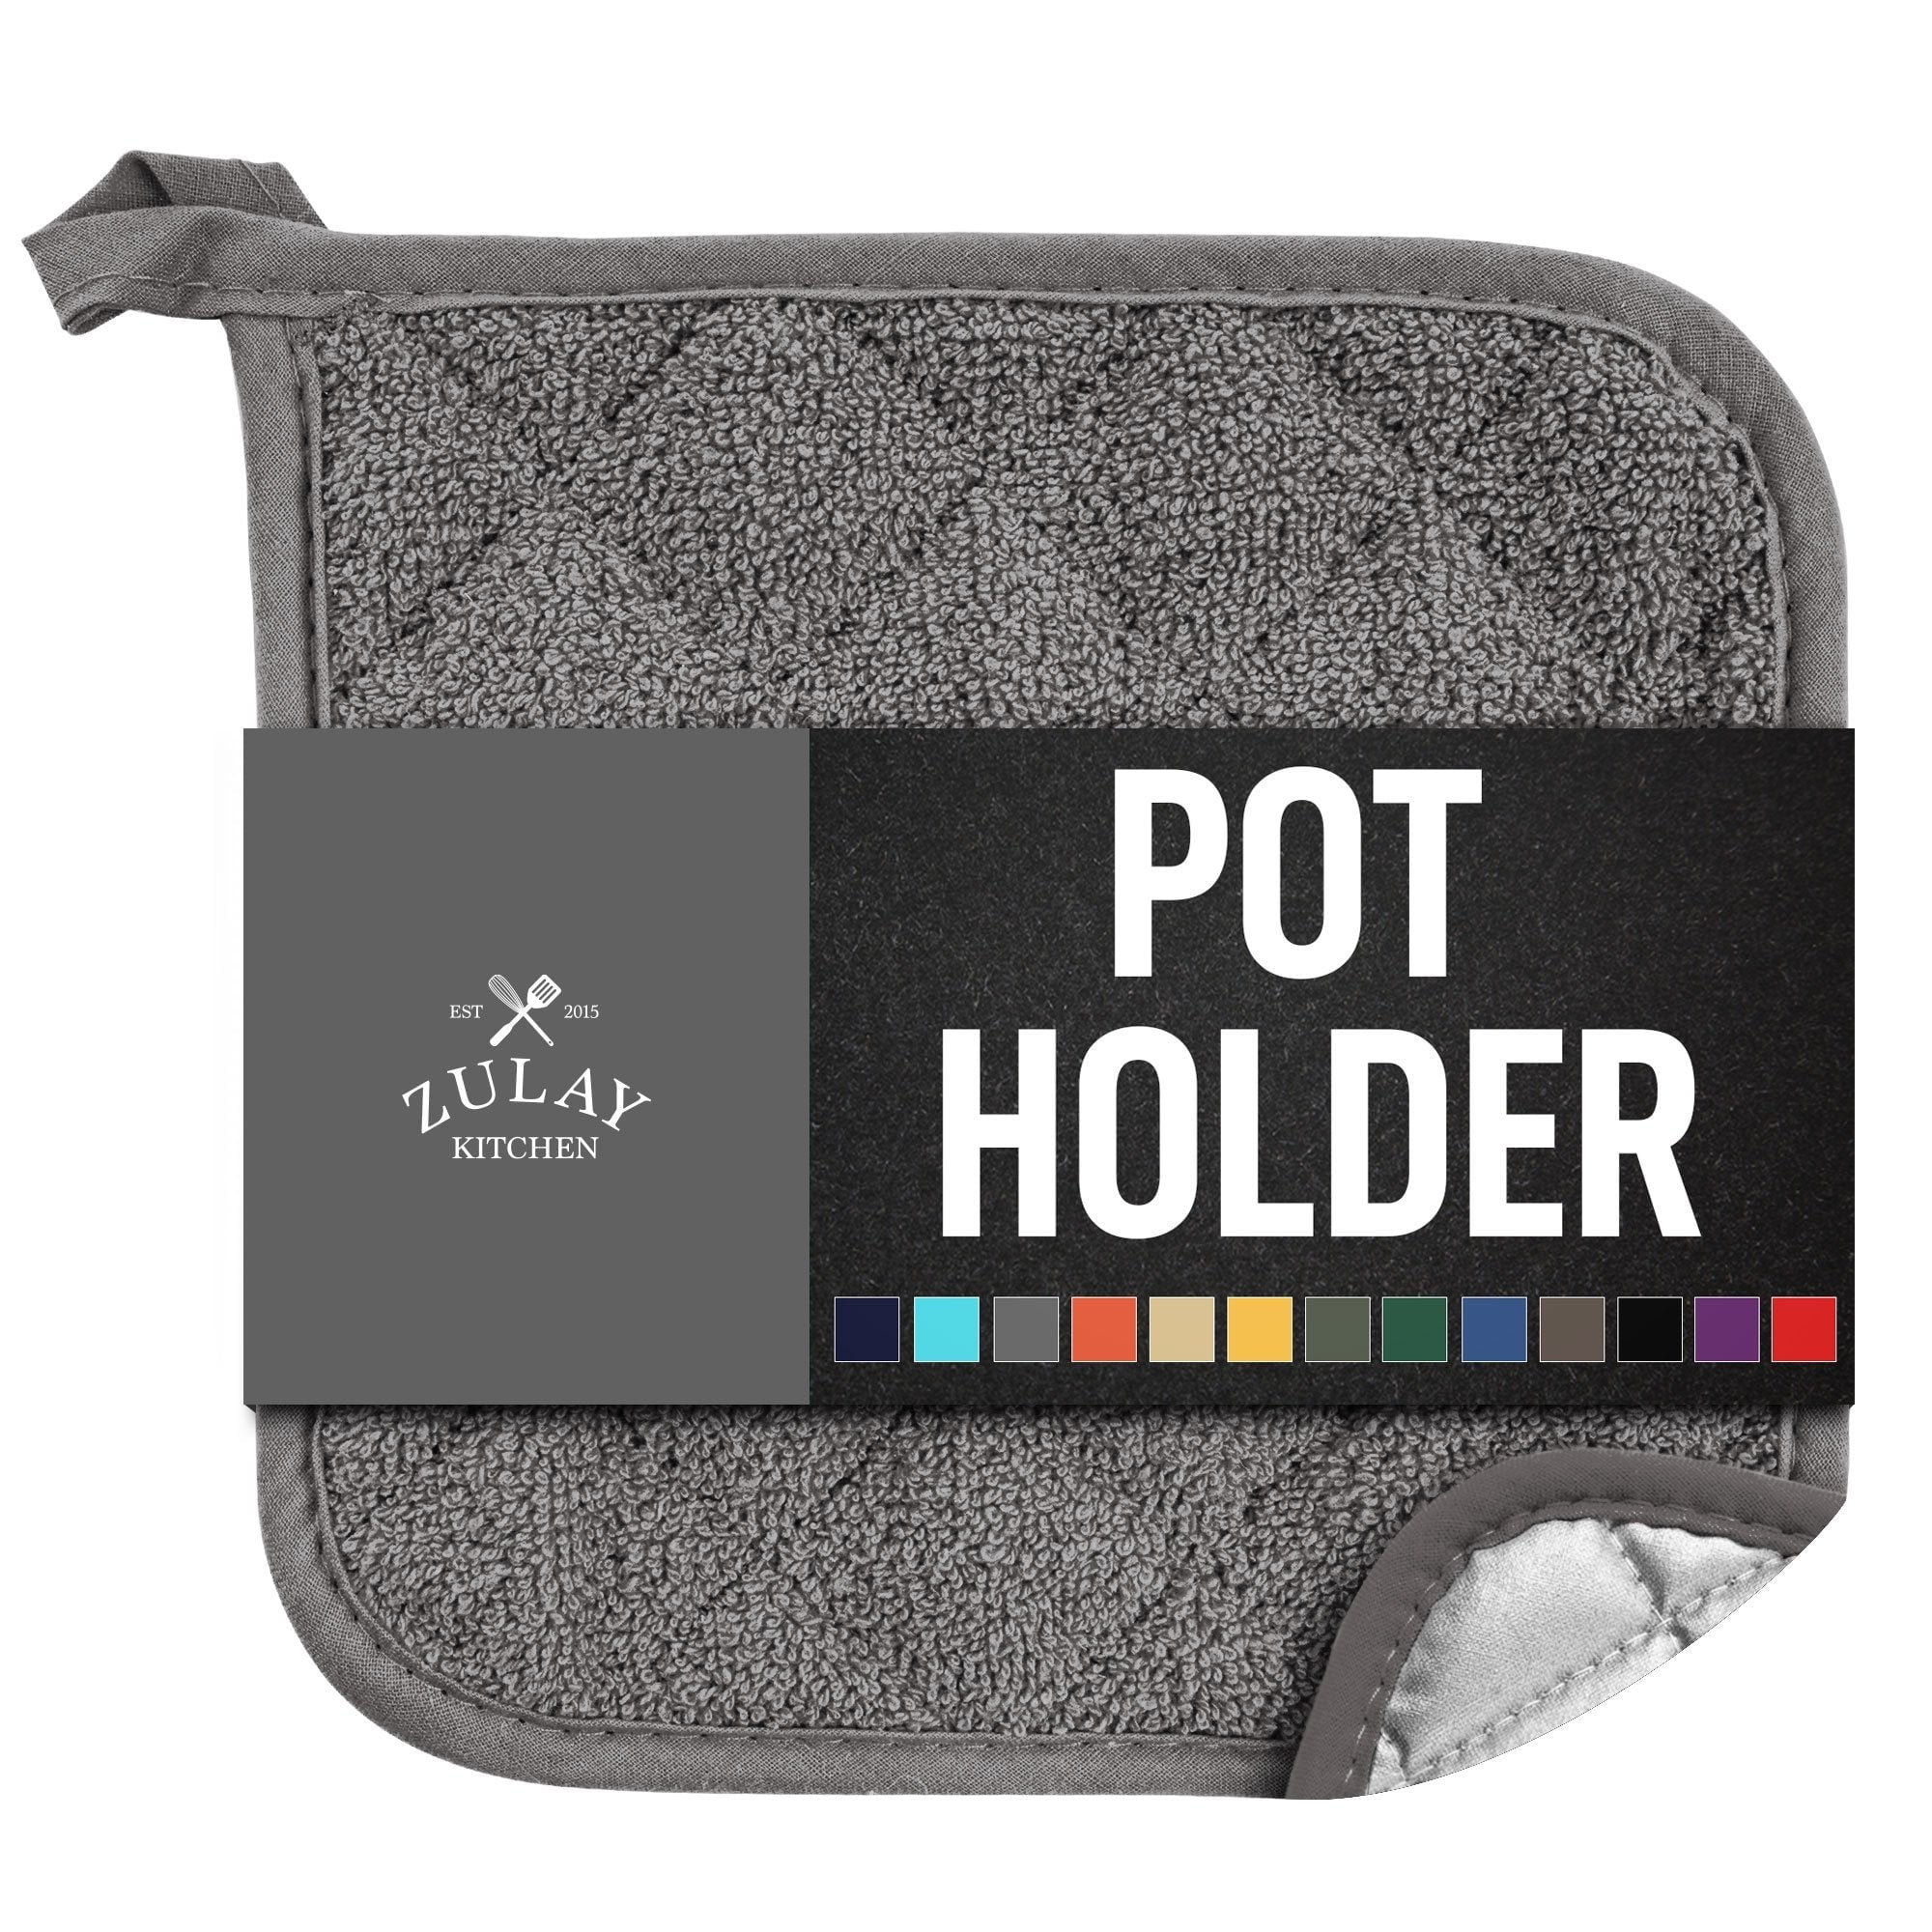 Zulay Kitchen Cotton Pot Holder 1 Pack Washable for Kitchen - Grey